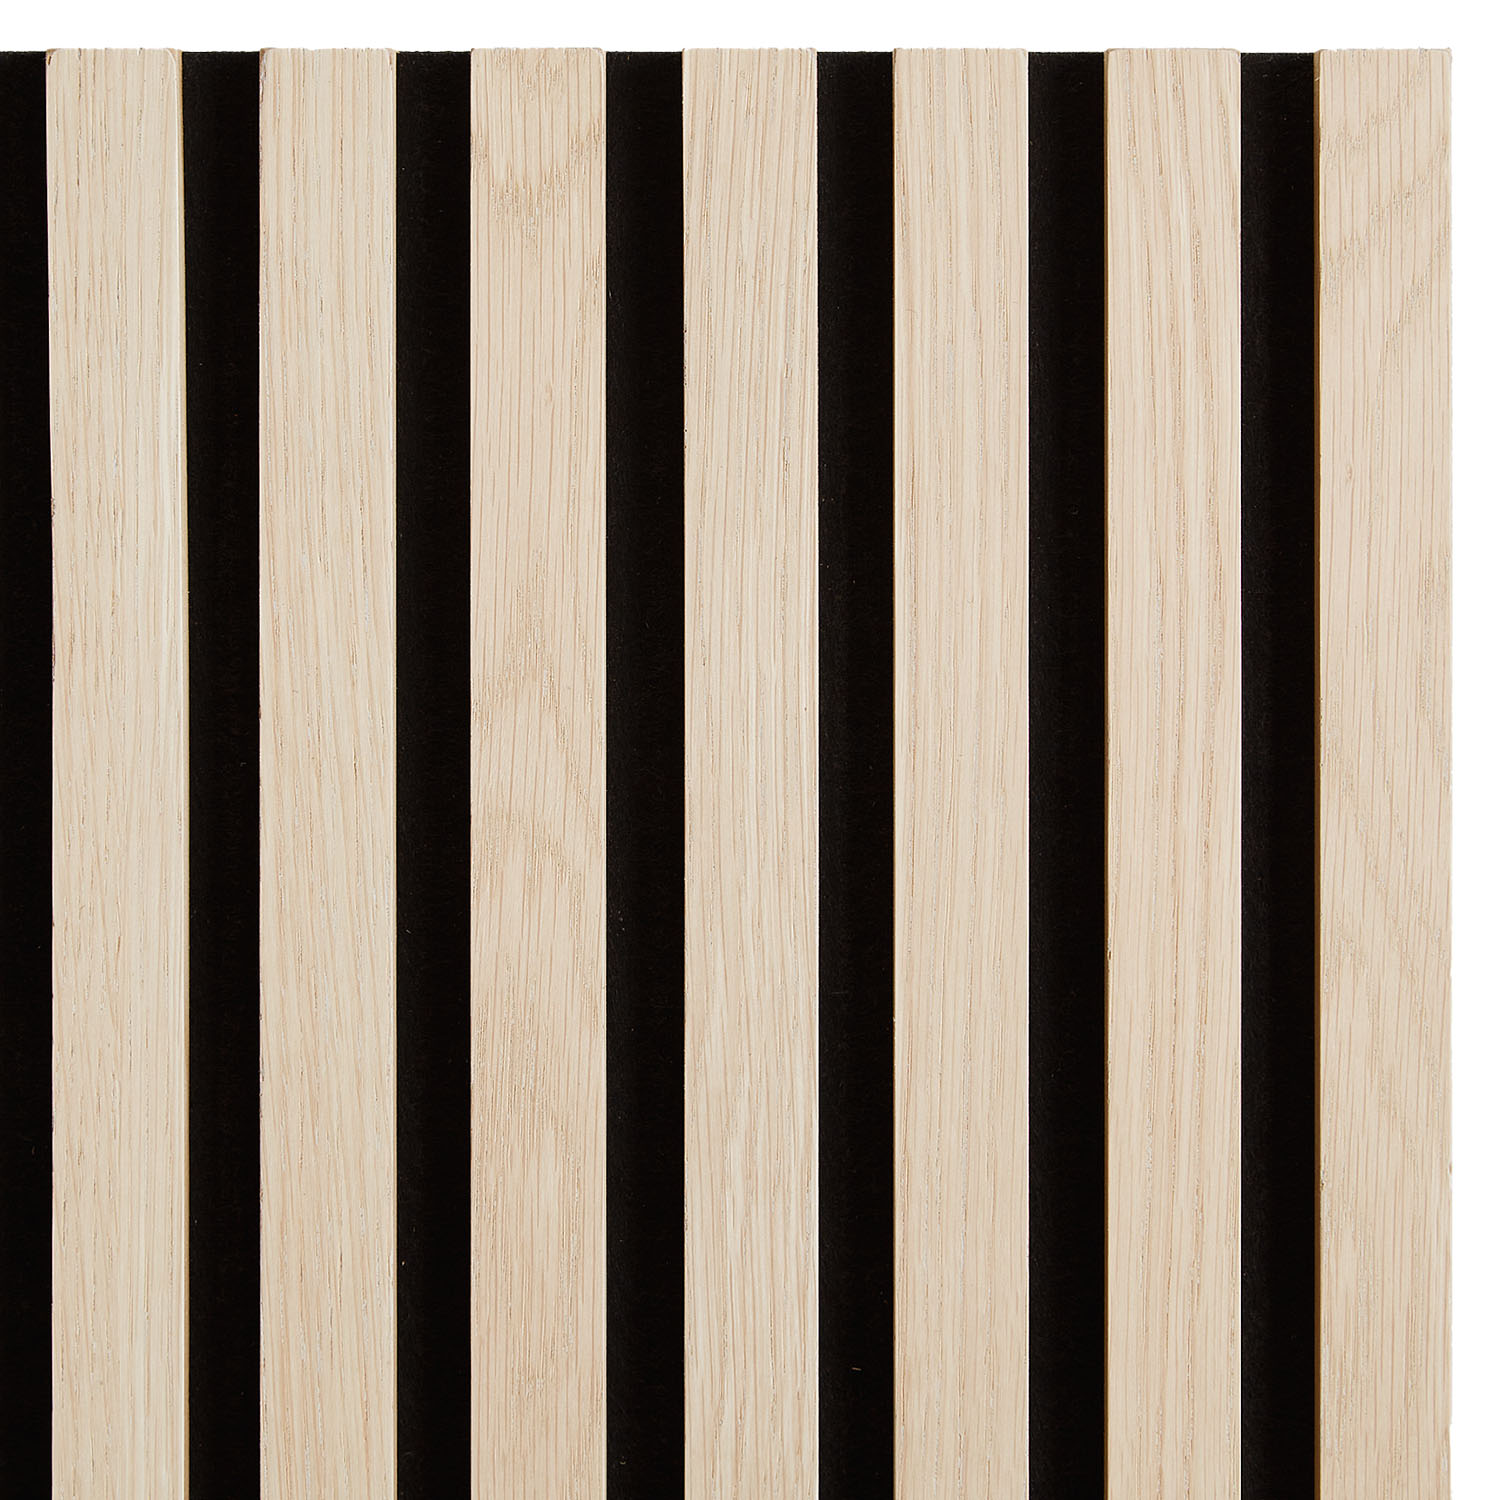 1, 2 or 4 Wall panels 60 x 120 cm Natural wood paneling for walls Acoustic panels Bedroom paneling Wall cladding Acoustic sound panels Sound proof panels